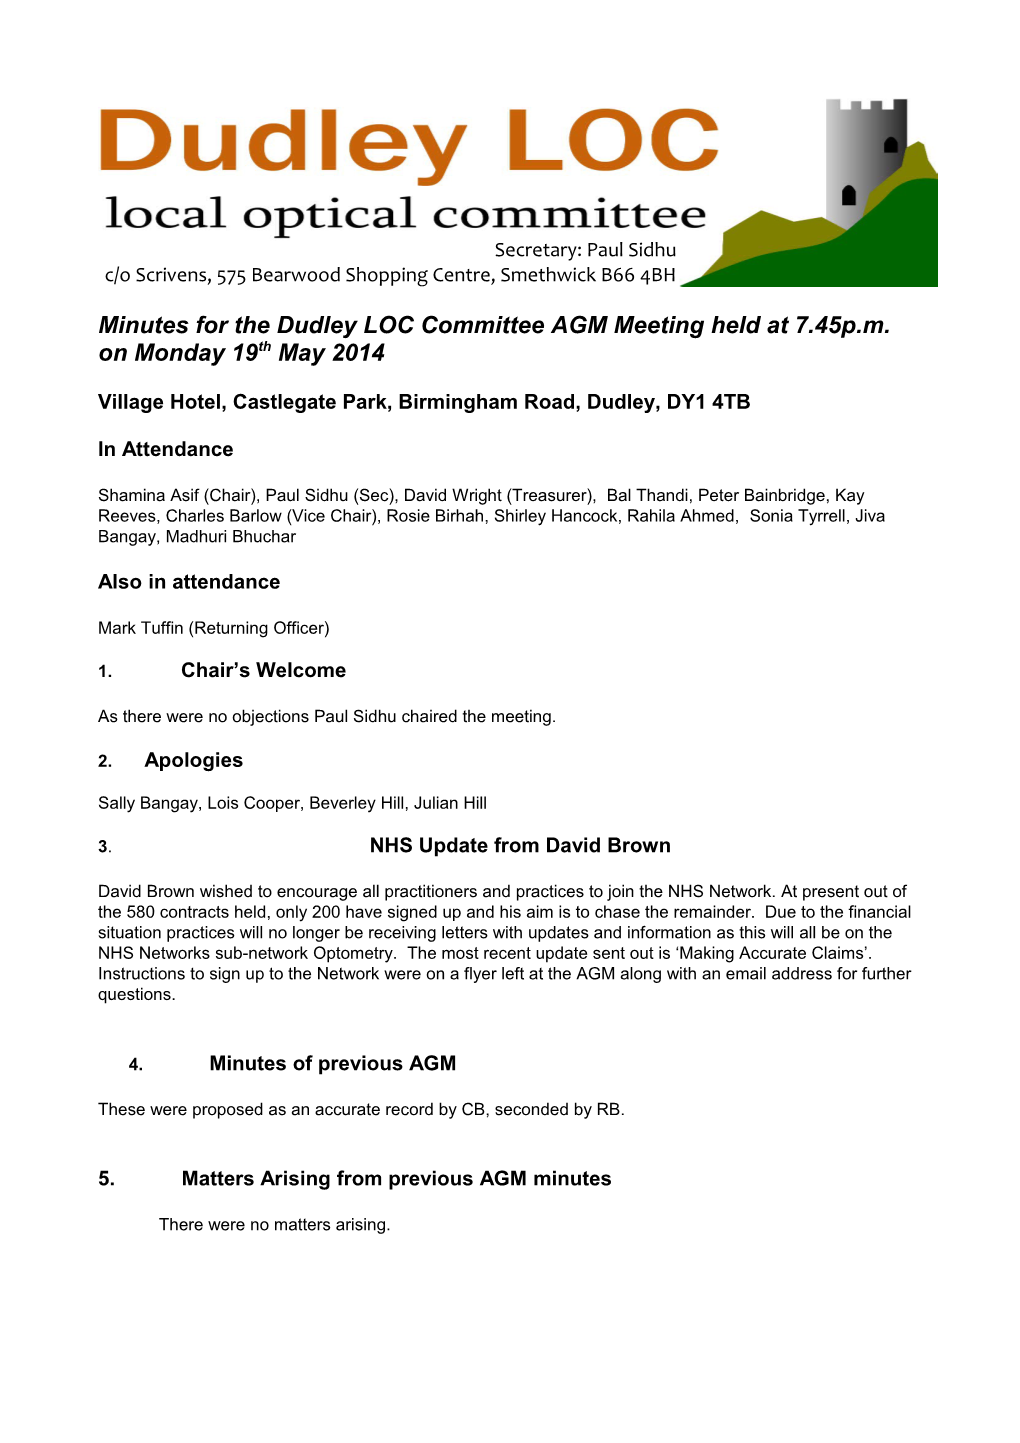 Minutes for the Dudley LOC Committee AGM Meeting Held at 7.45P.M. on Monday 19Th May 2014